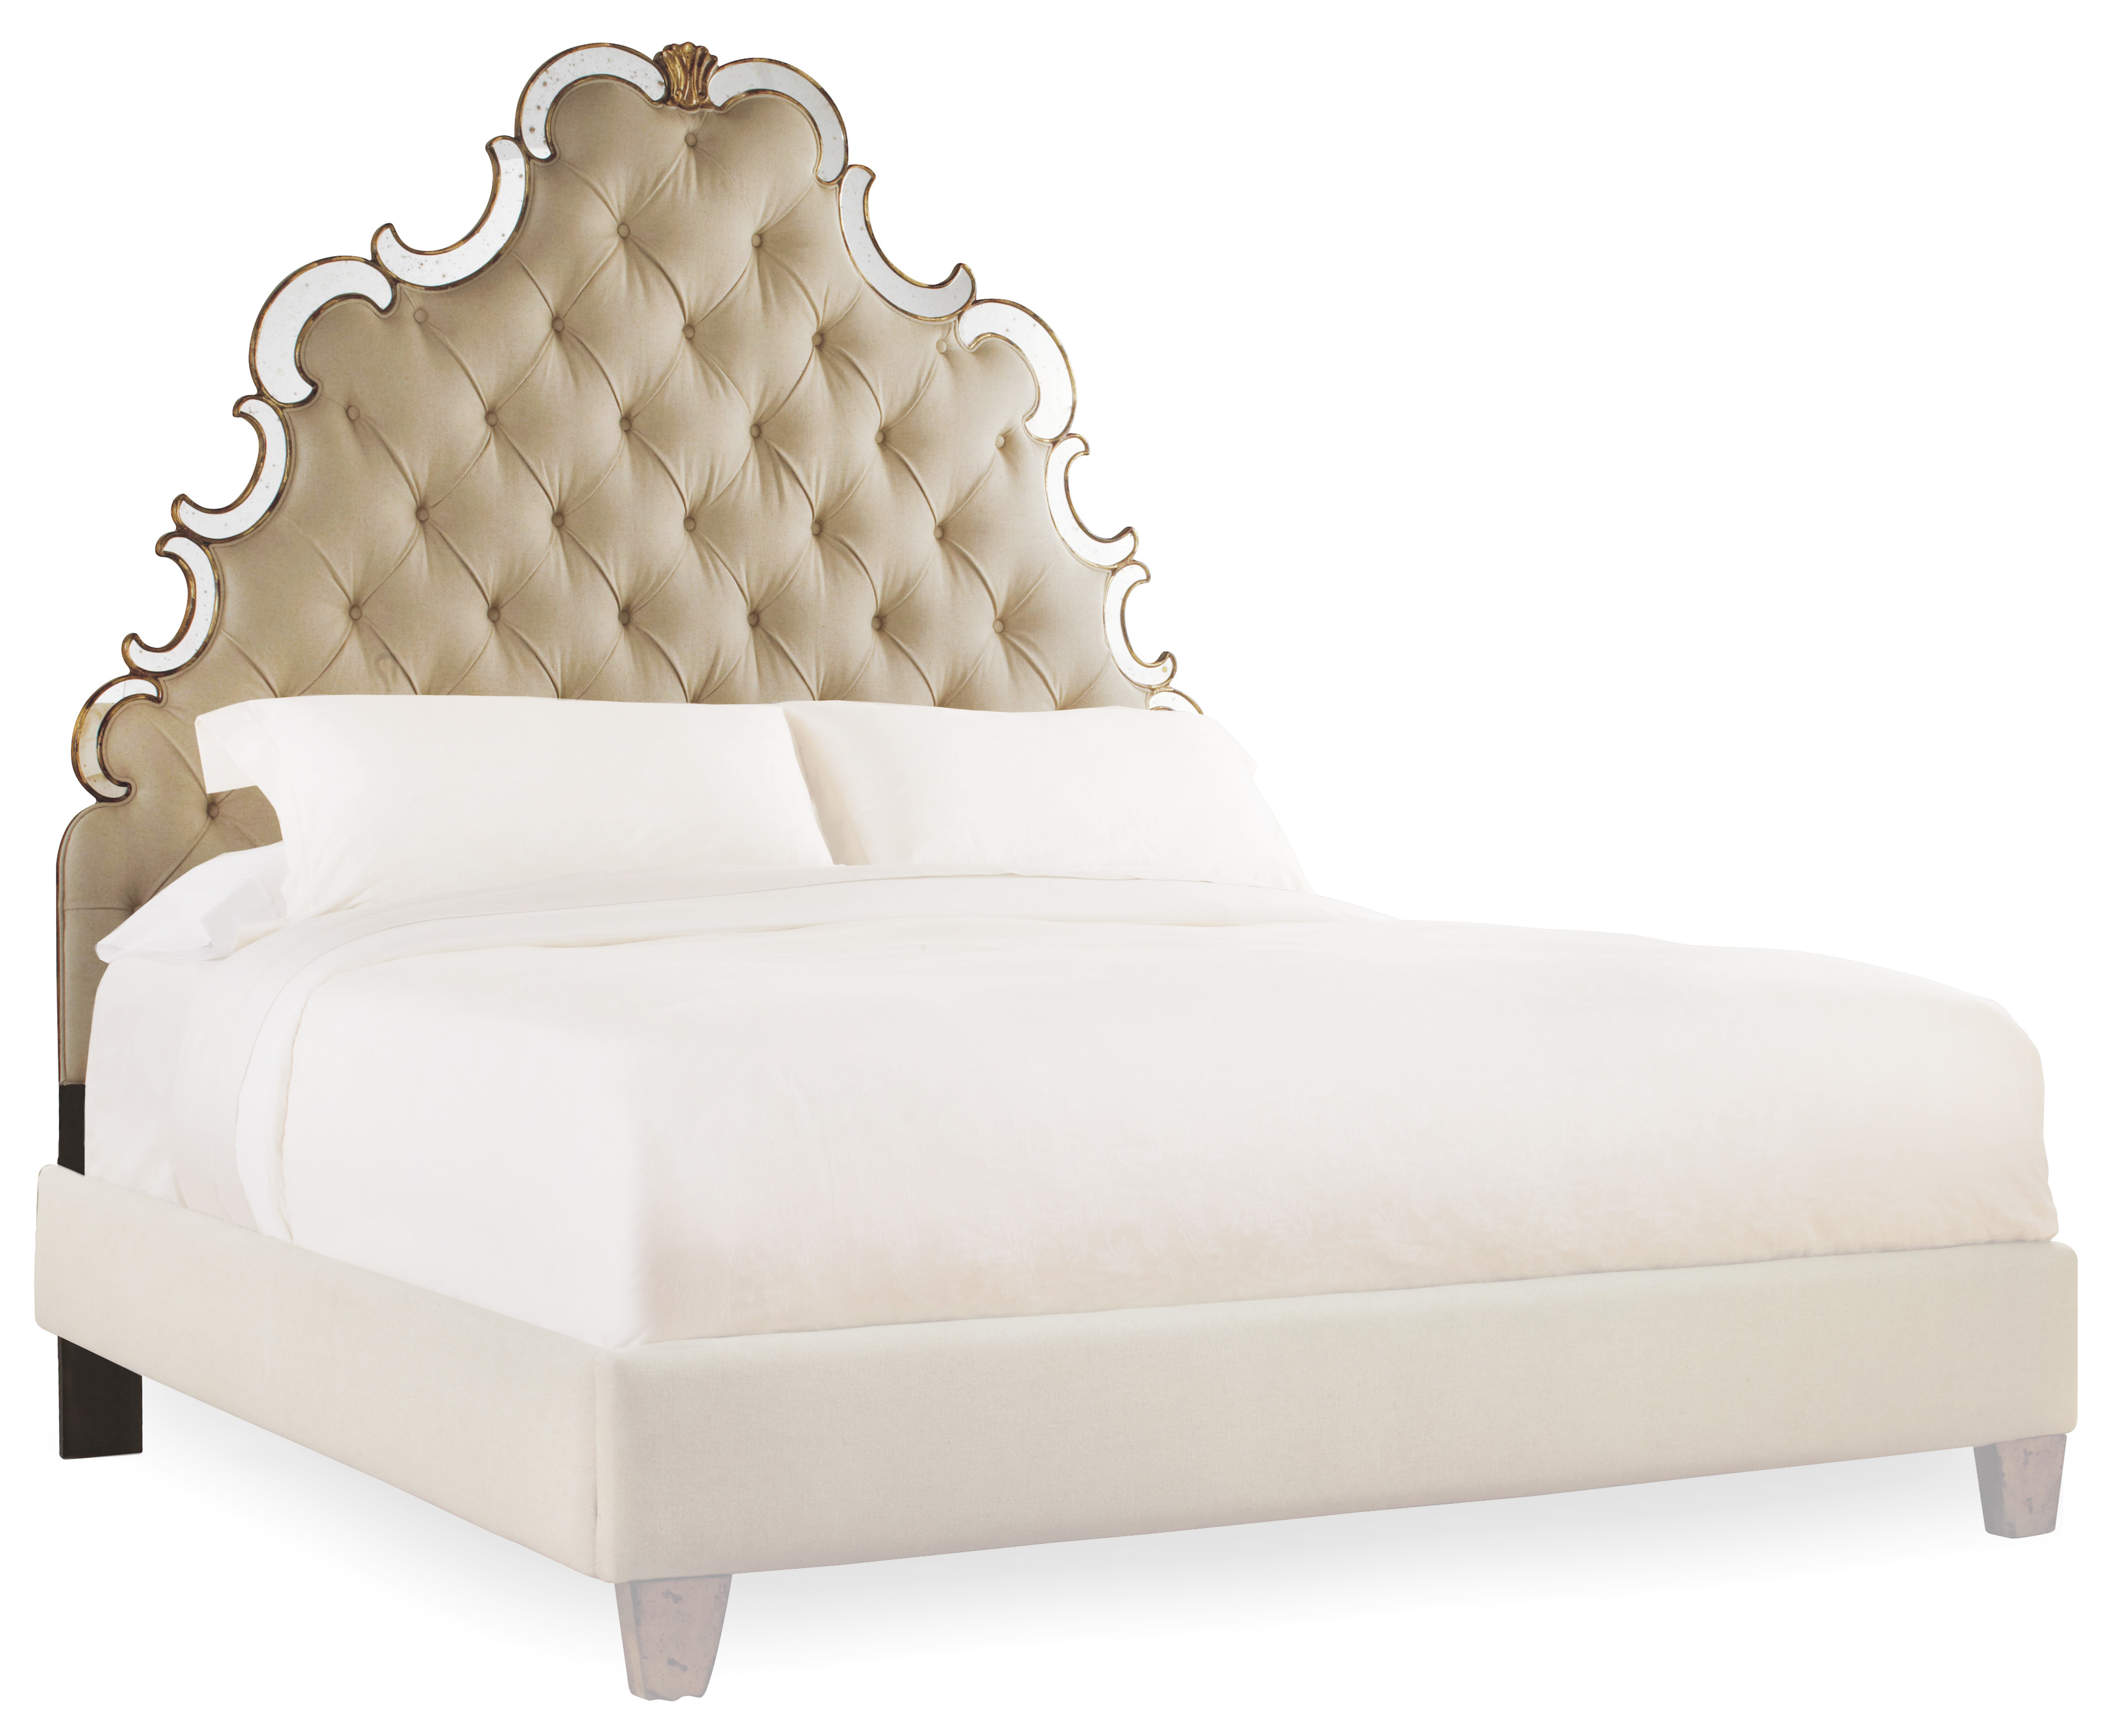 Picture of Tufted Headboard Bling